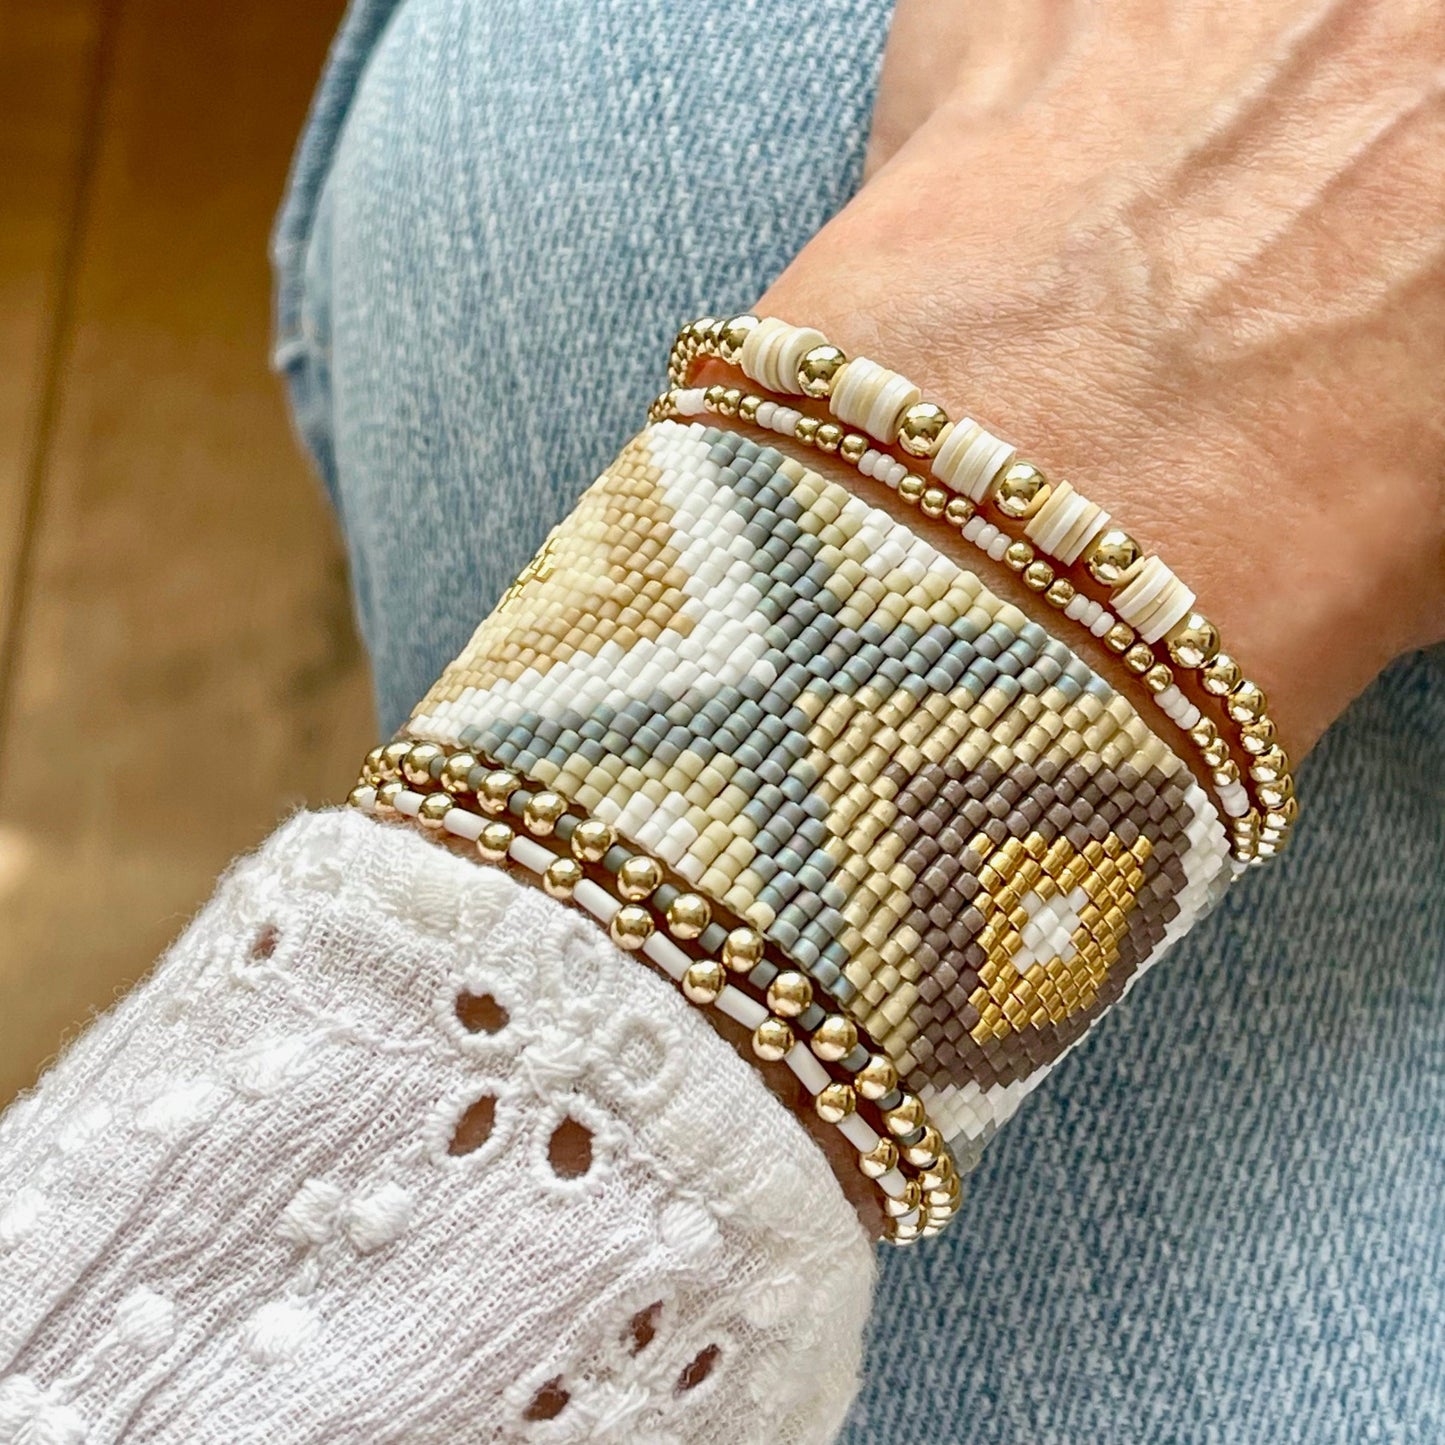 Heishi Bead Bracelet | Gold Bead Bracelets with White & Gray Seed Beads | Stack of 4